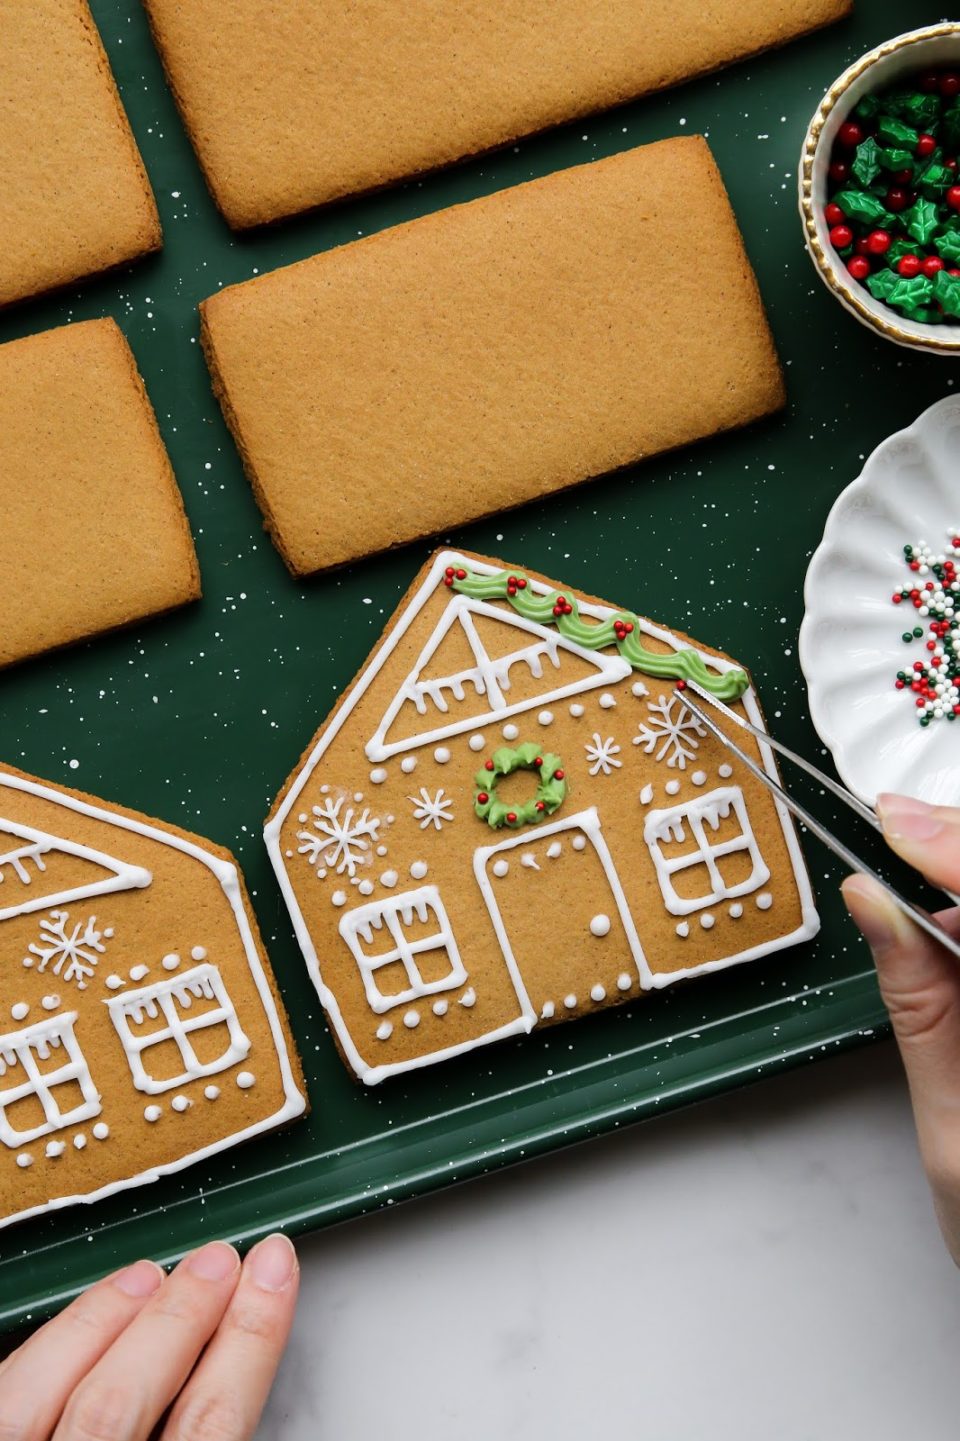 How to Build a Gingerbread House - Wilton